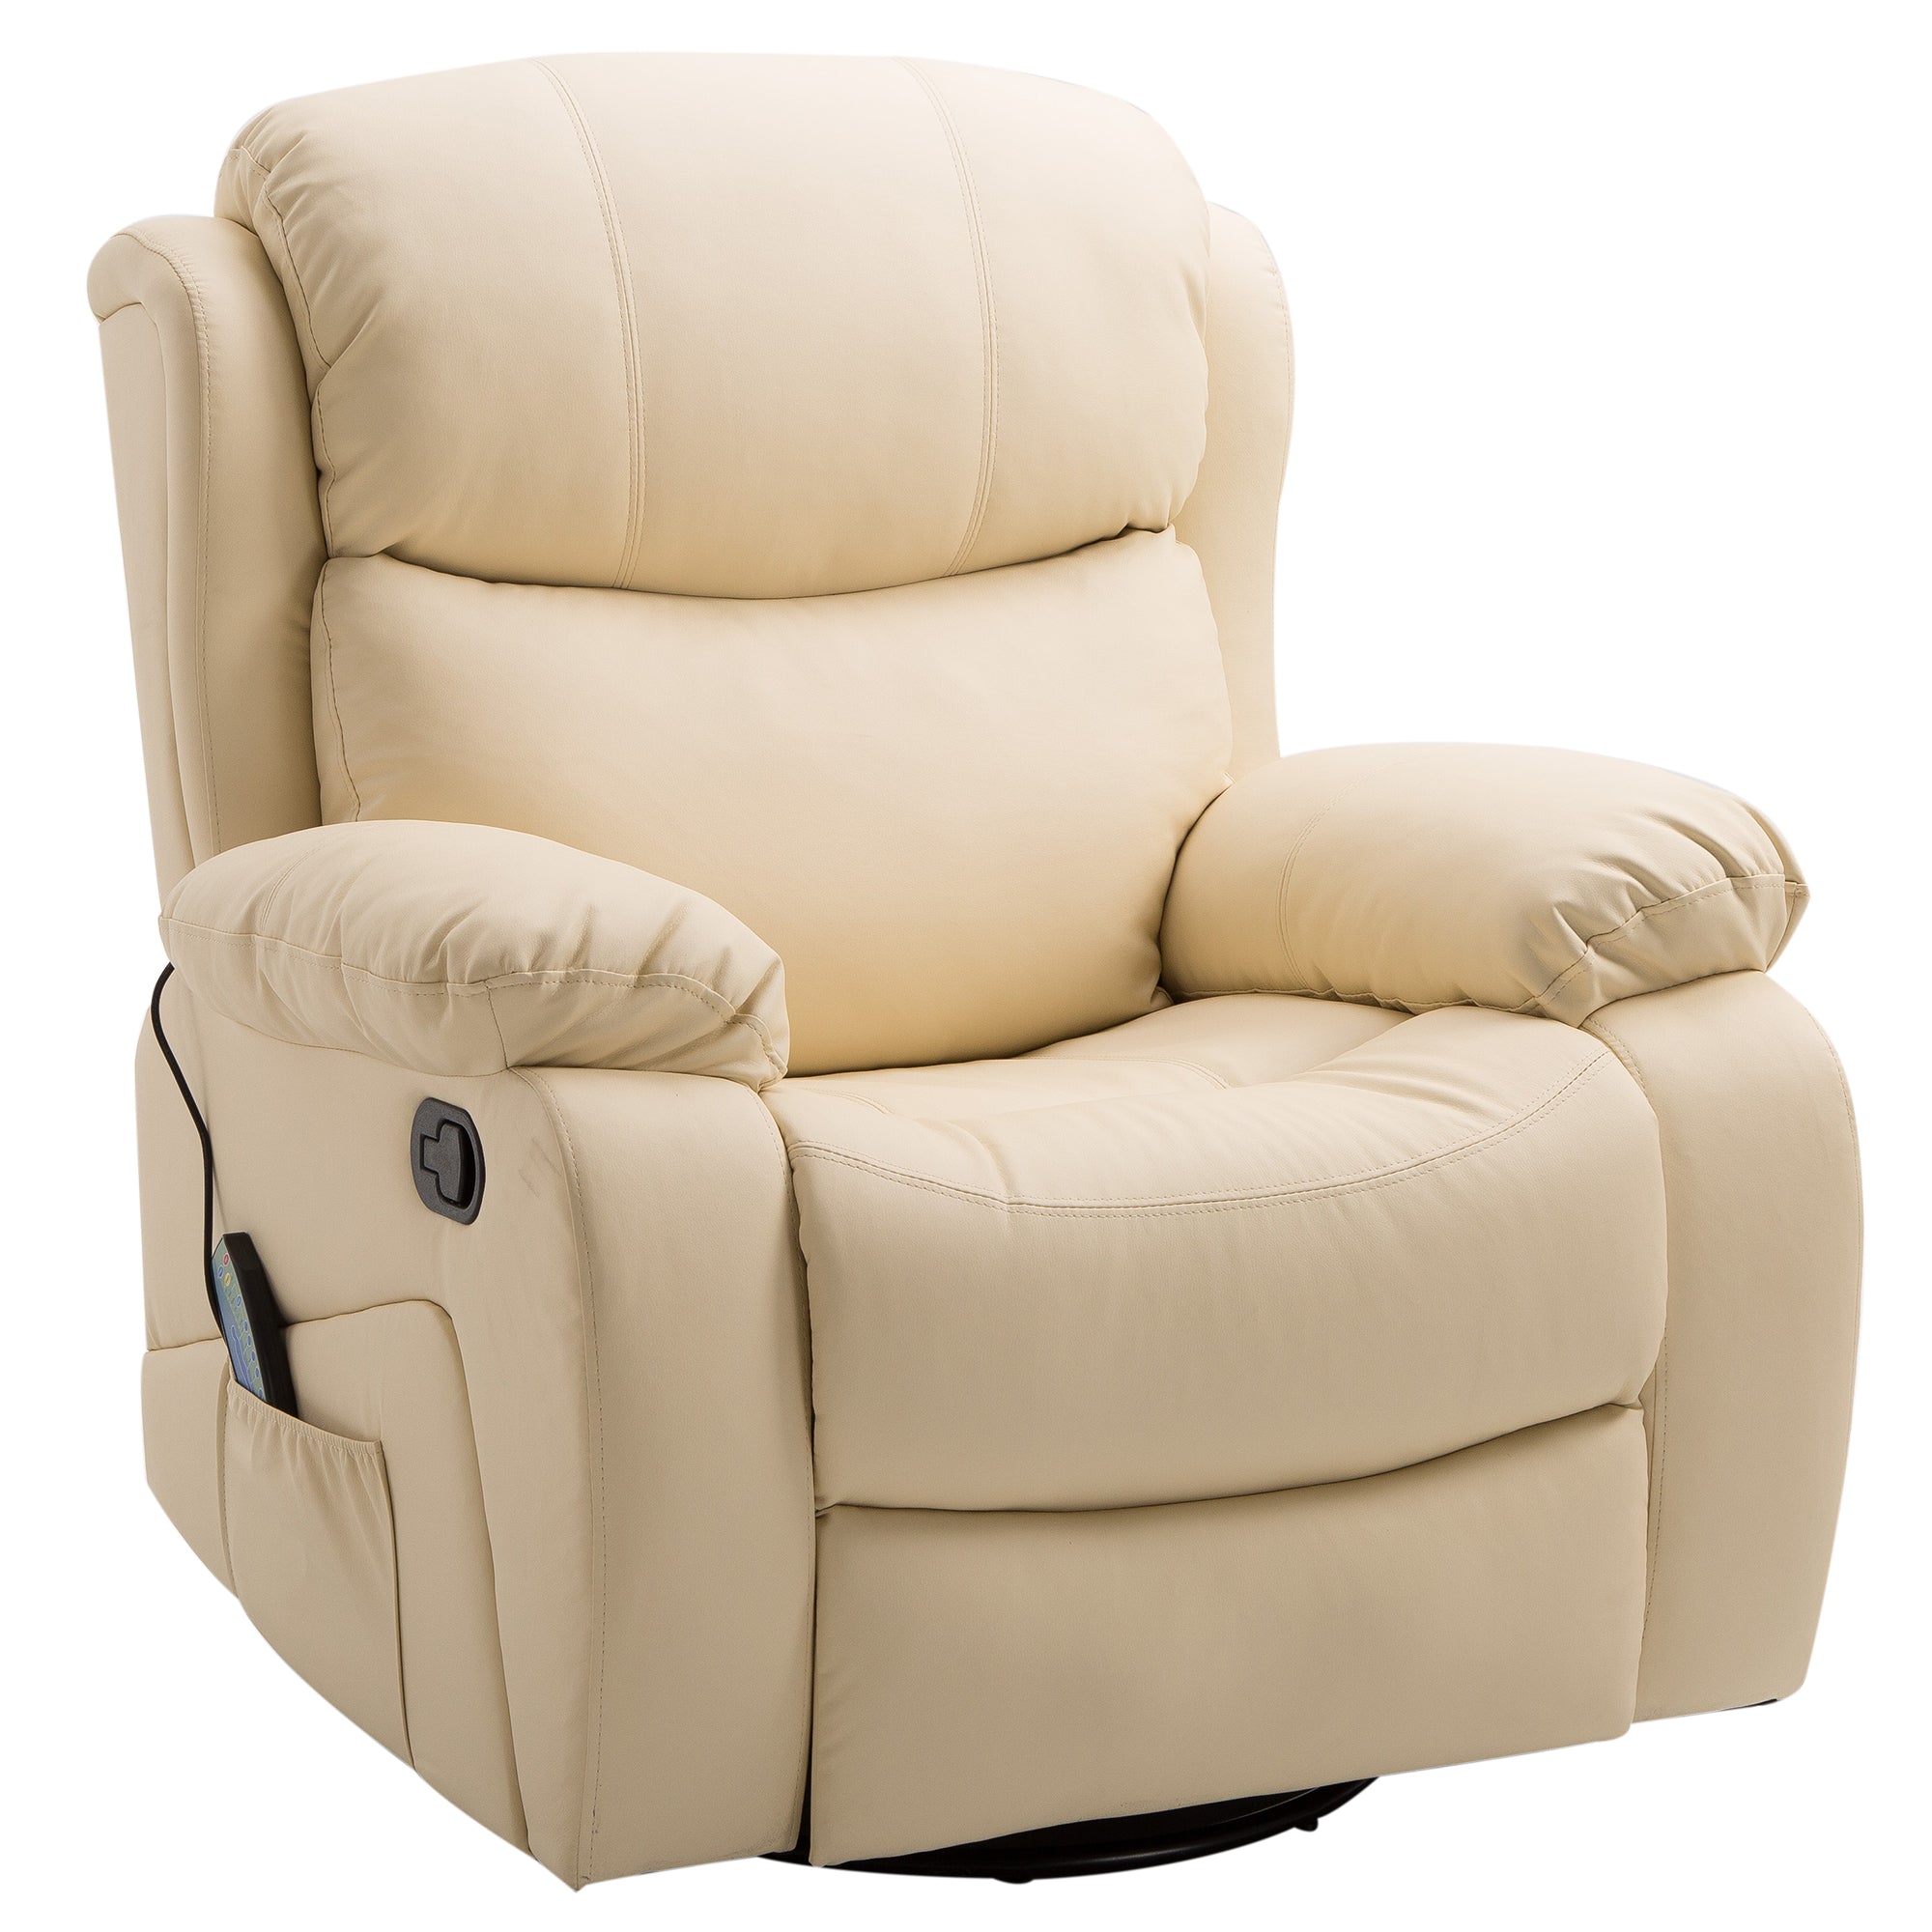 HOMCOM PU Leather Massage Recliner Chair with 8 Points and Heat - Manual Reclining Chair with Swivel Base - Footrest and Remote - Rocking Armchair - B